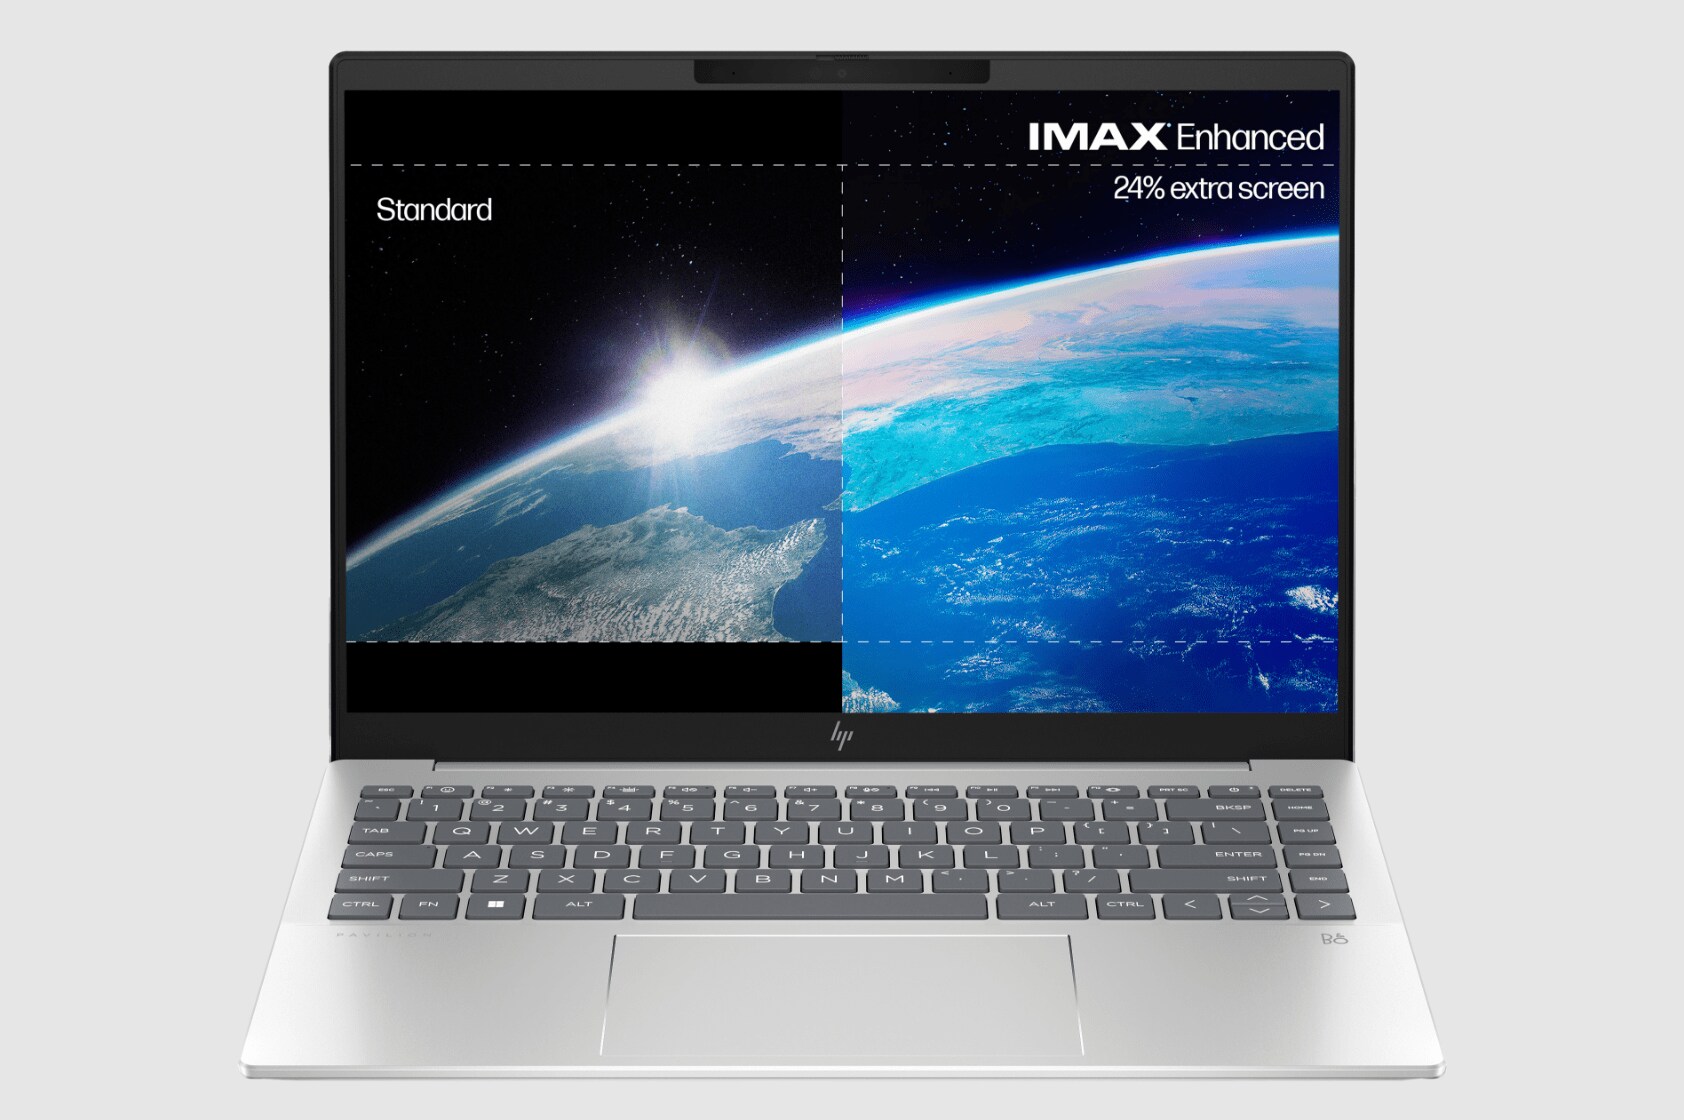 HP launches Pavilion Plus laptops with IMAX-enhanced displays